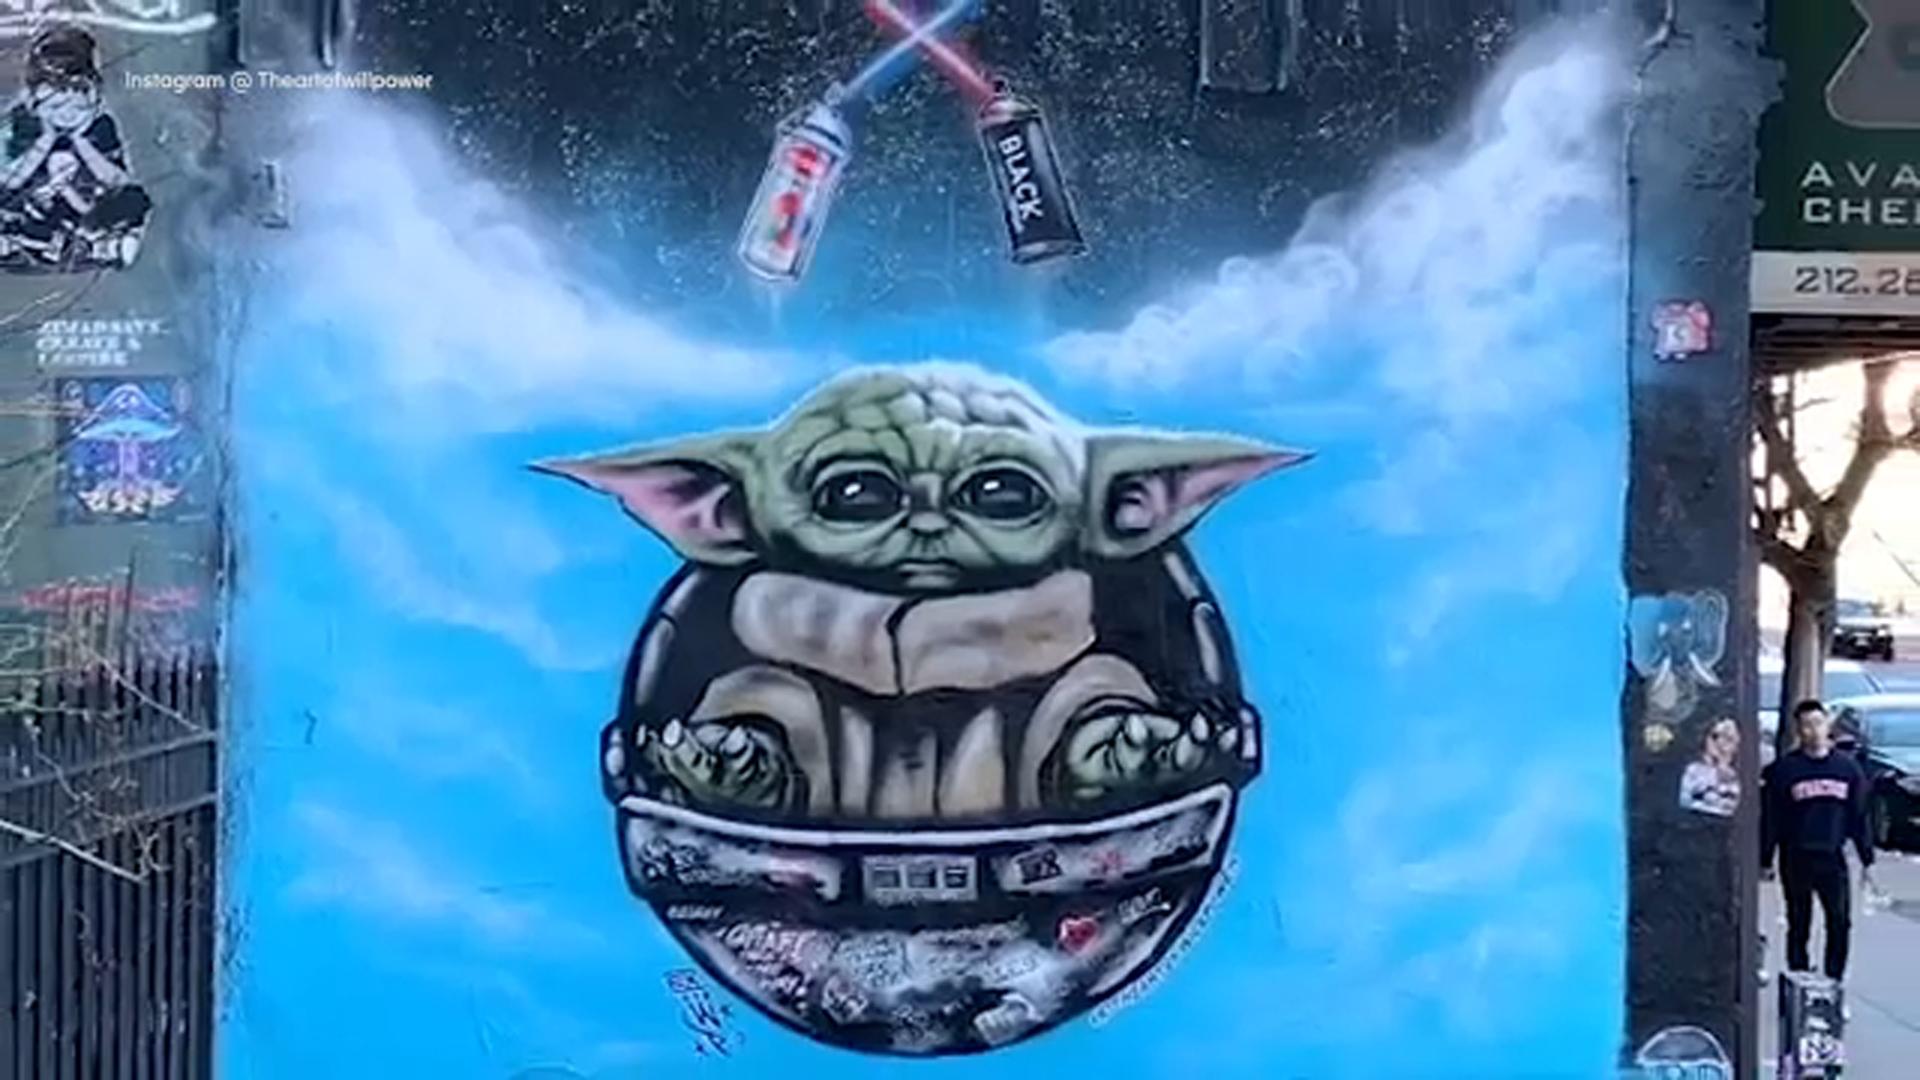 Timelapse video shows Baby Yoda come to life in New York City